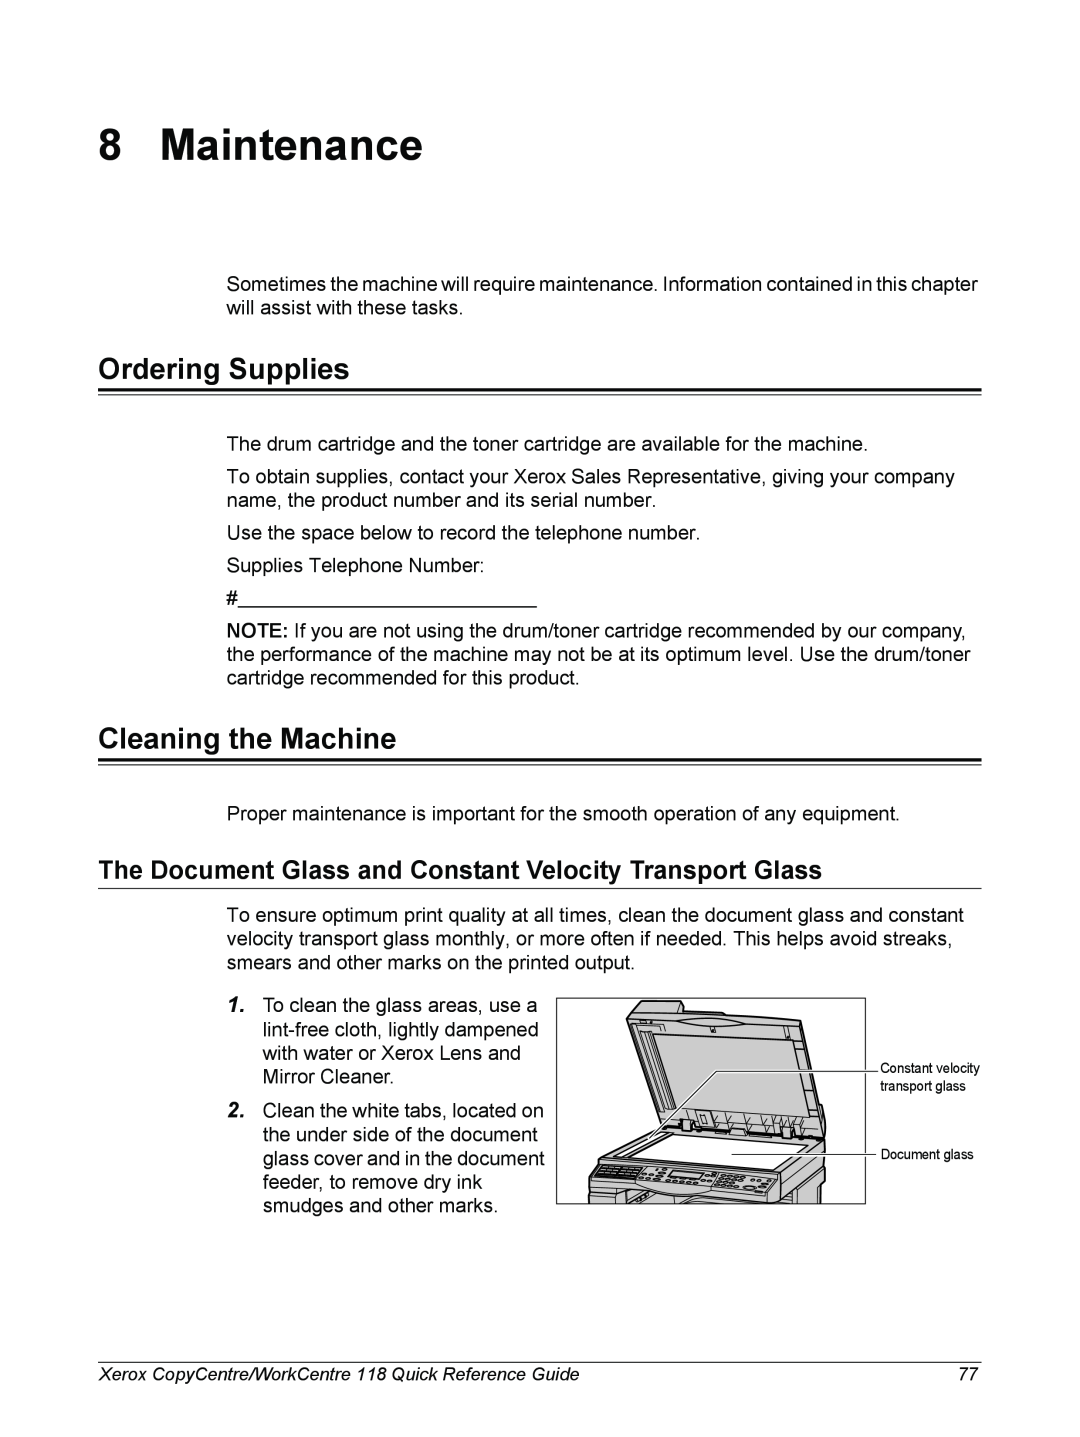 Xerox M118 Maintenance, Ordering Supplies, Cleaning the Machine, The Document Glass and Constant Velocity Transport Glass 